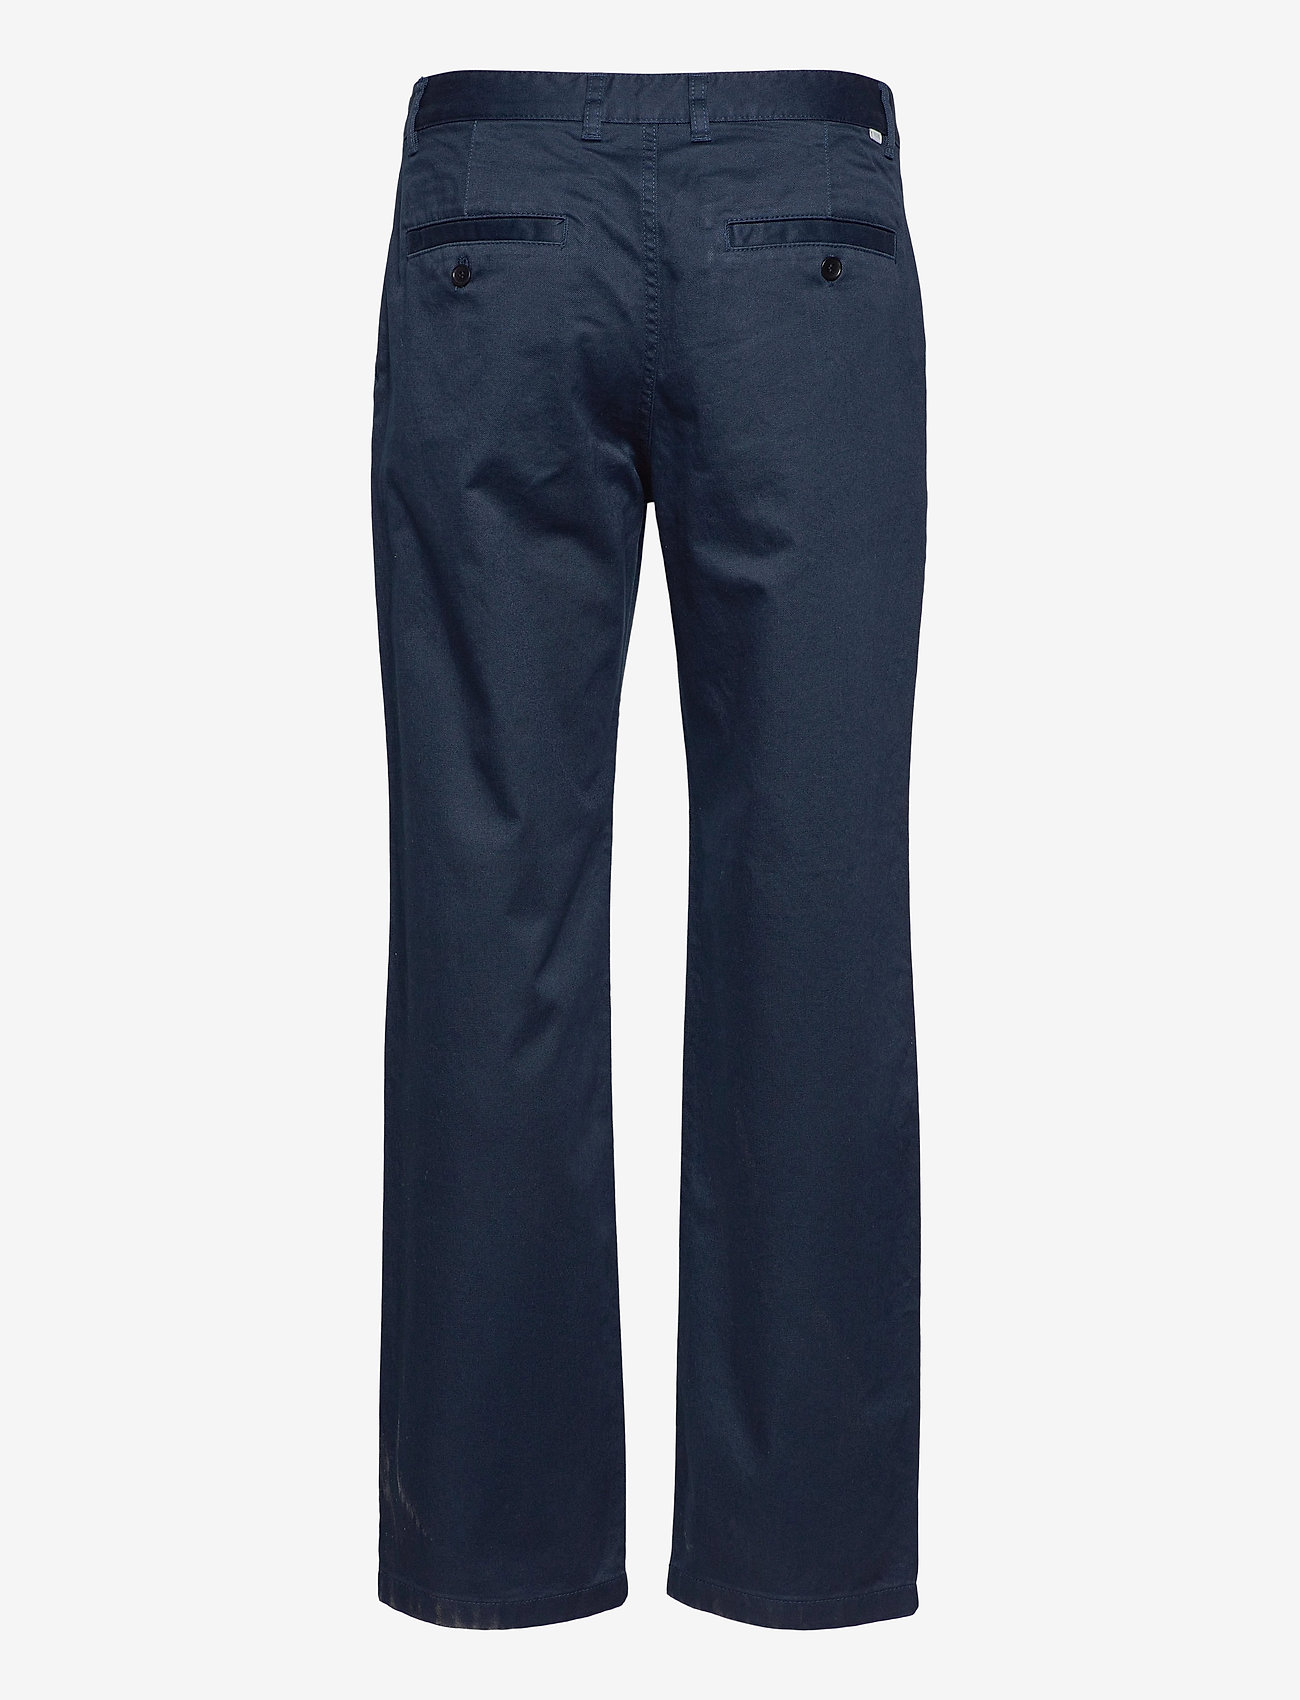 Wood Wood - Stefan classic trousers - chinot - navy - 1